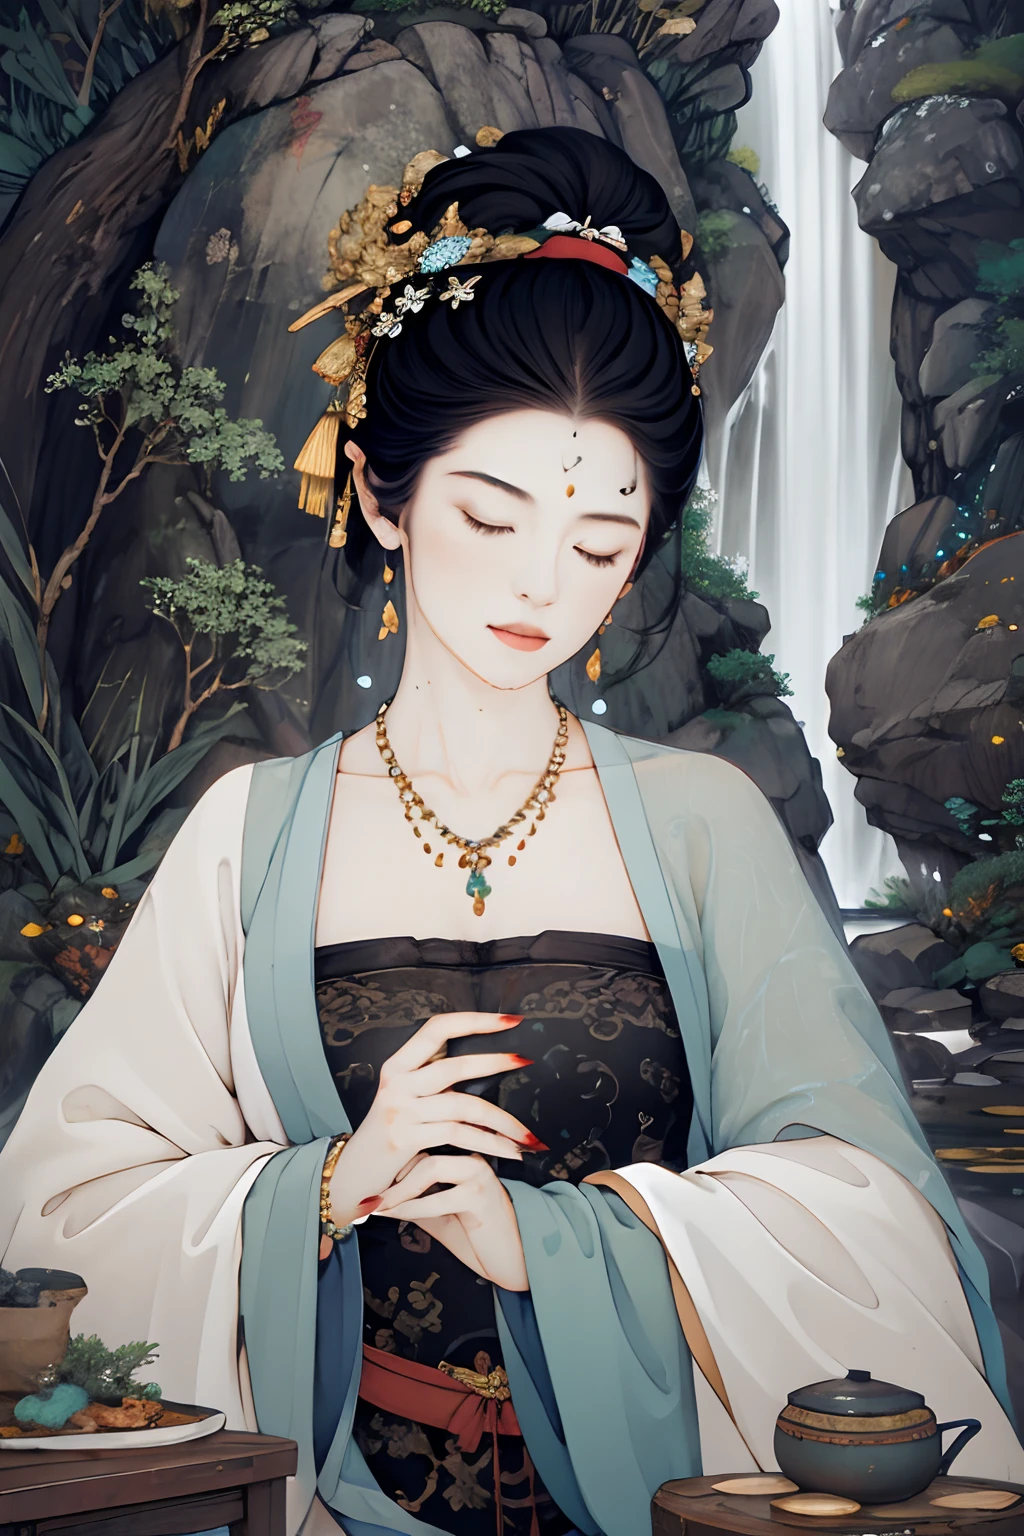 Masterpiece, 1girll, nail_Polish, jewelry, necklace, black_Hair, Closed_Eyes, Solo, dress,black_Hair, ancient art, Chinese, waterfallr